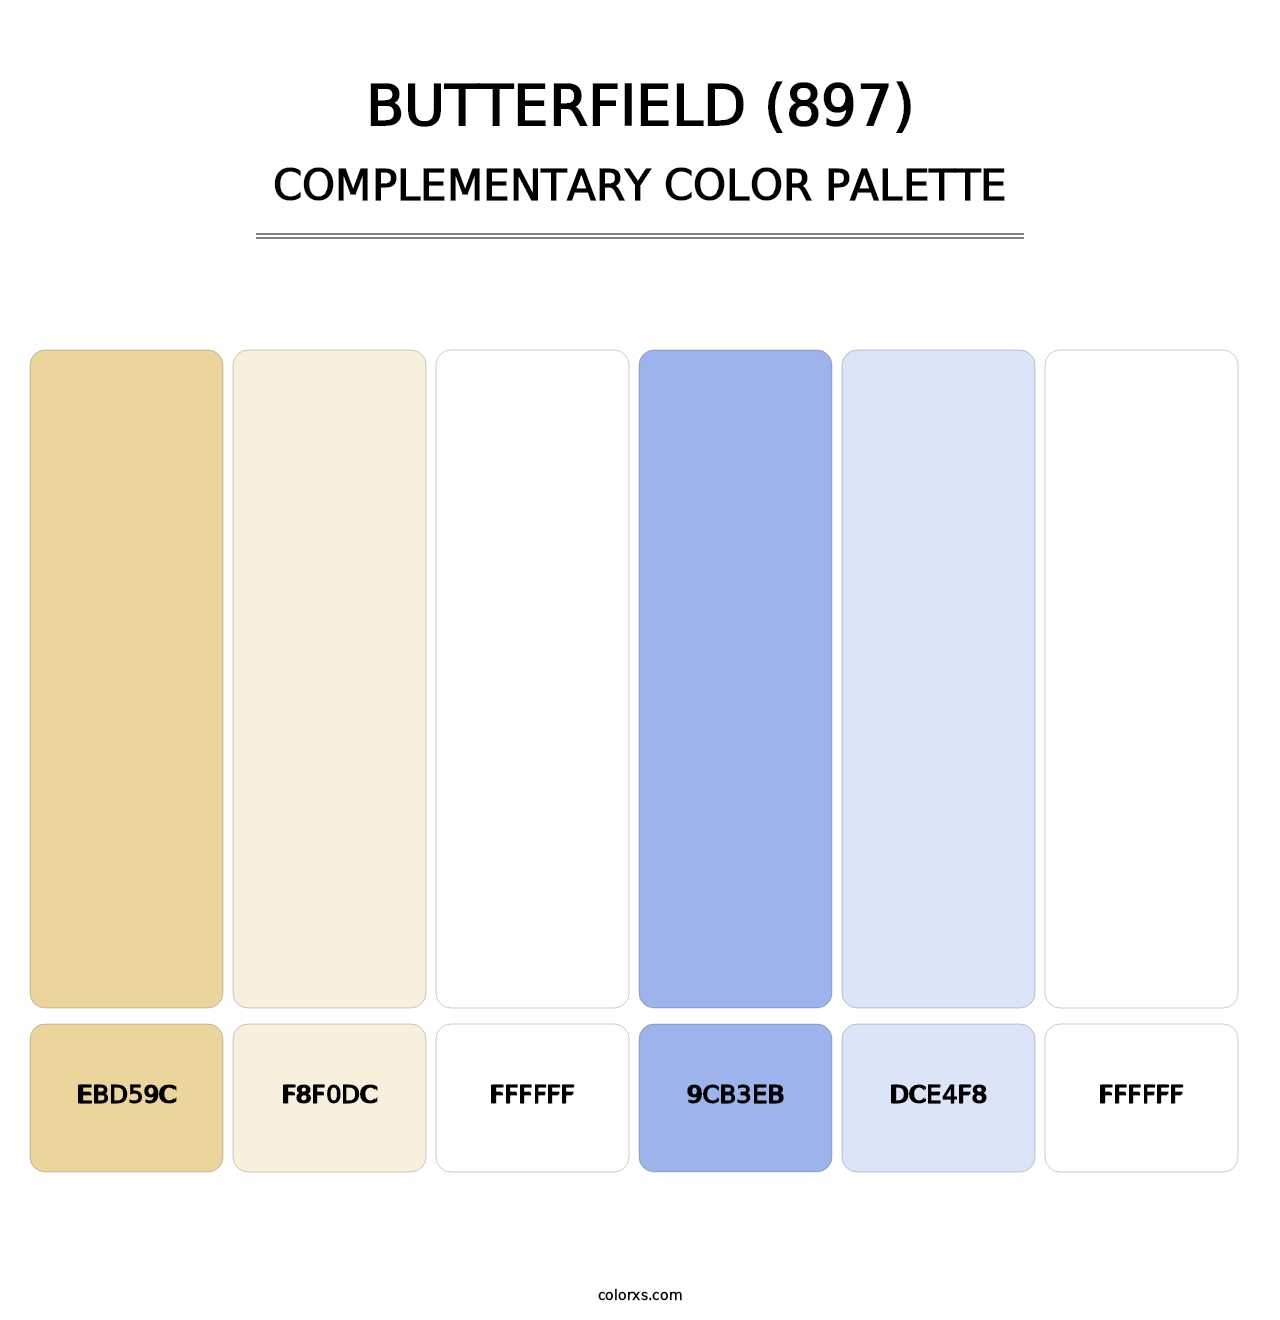 Butterfield (897) - Complementary Color Palette